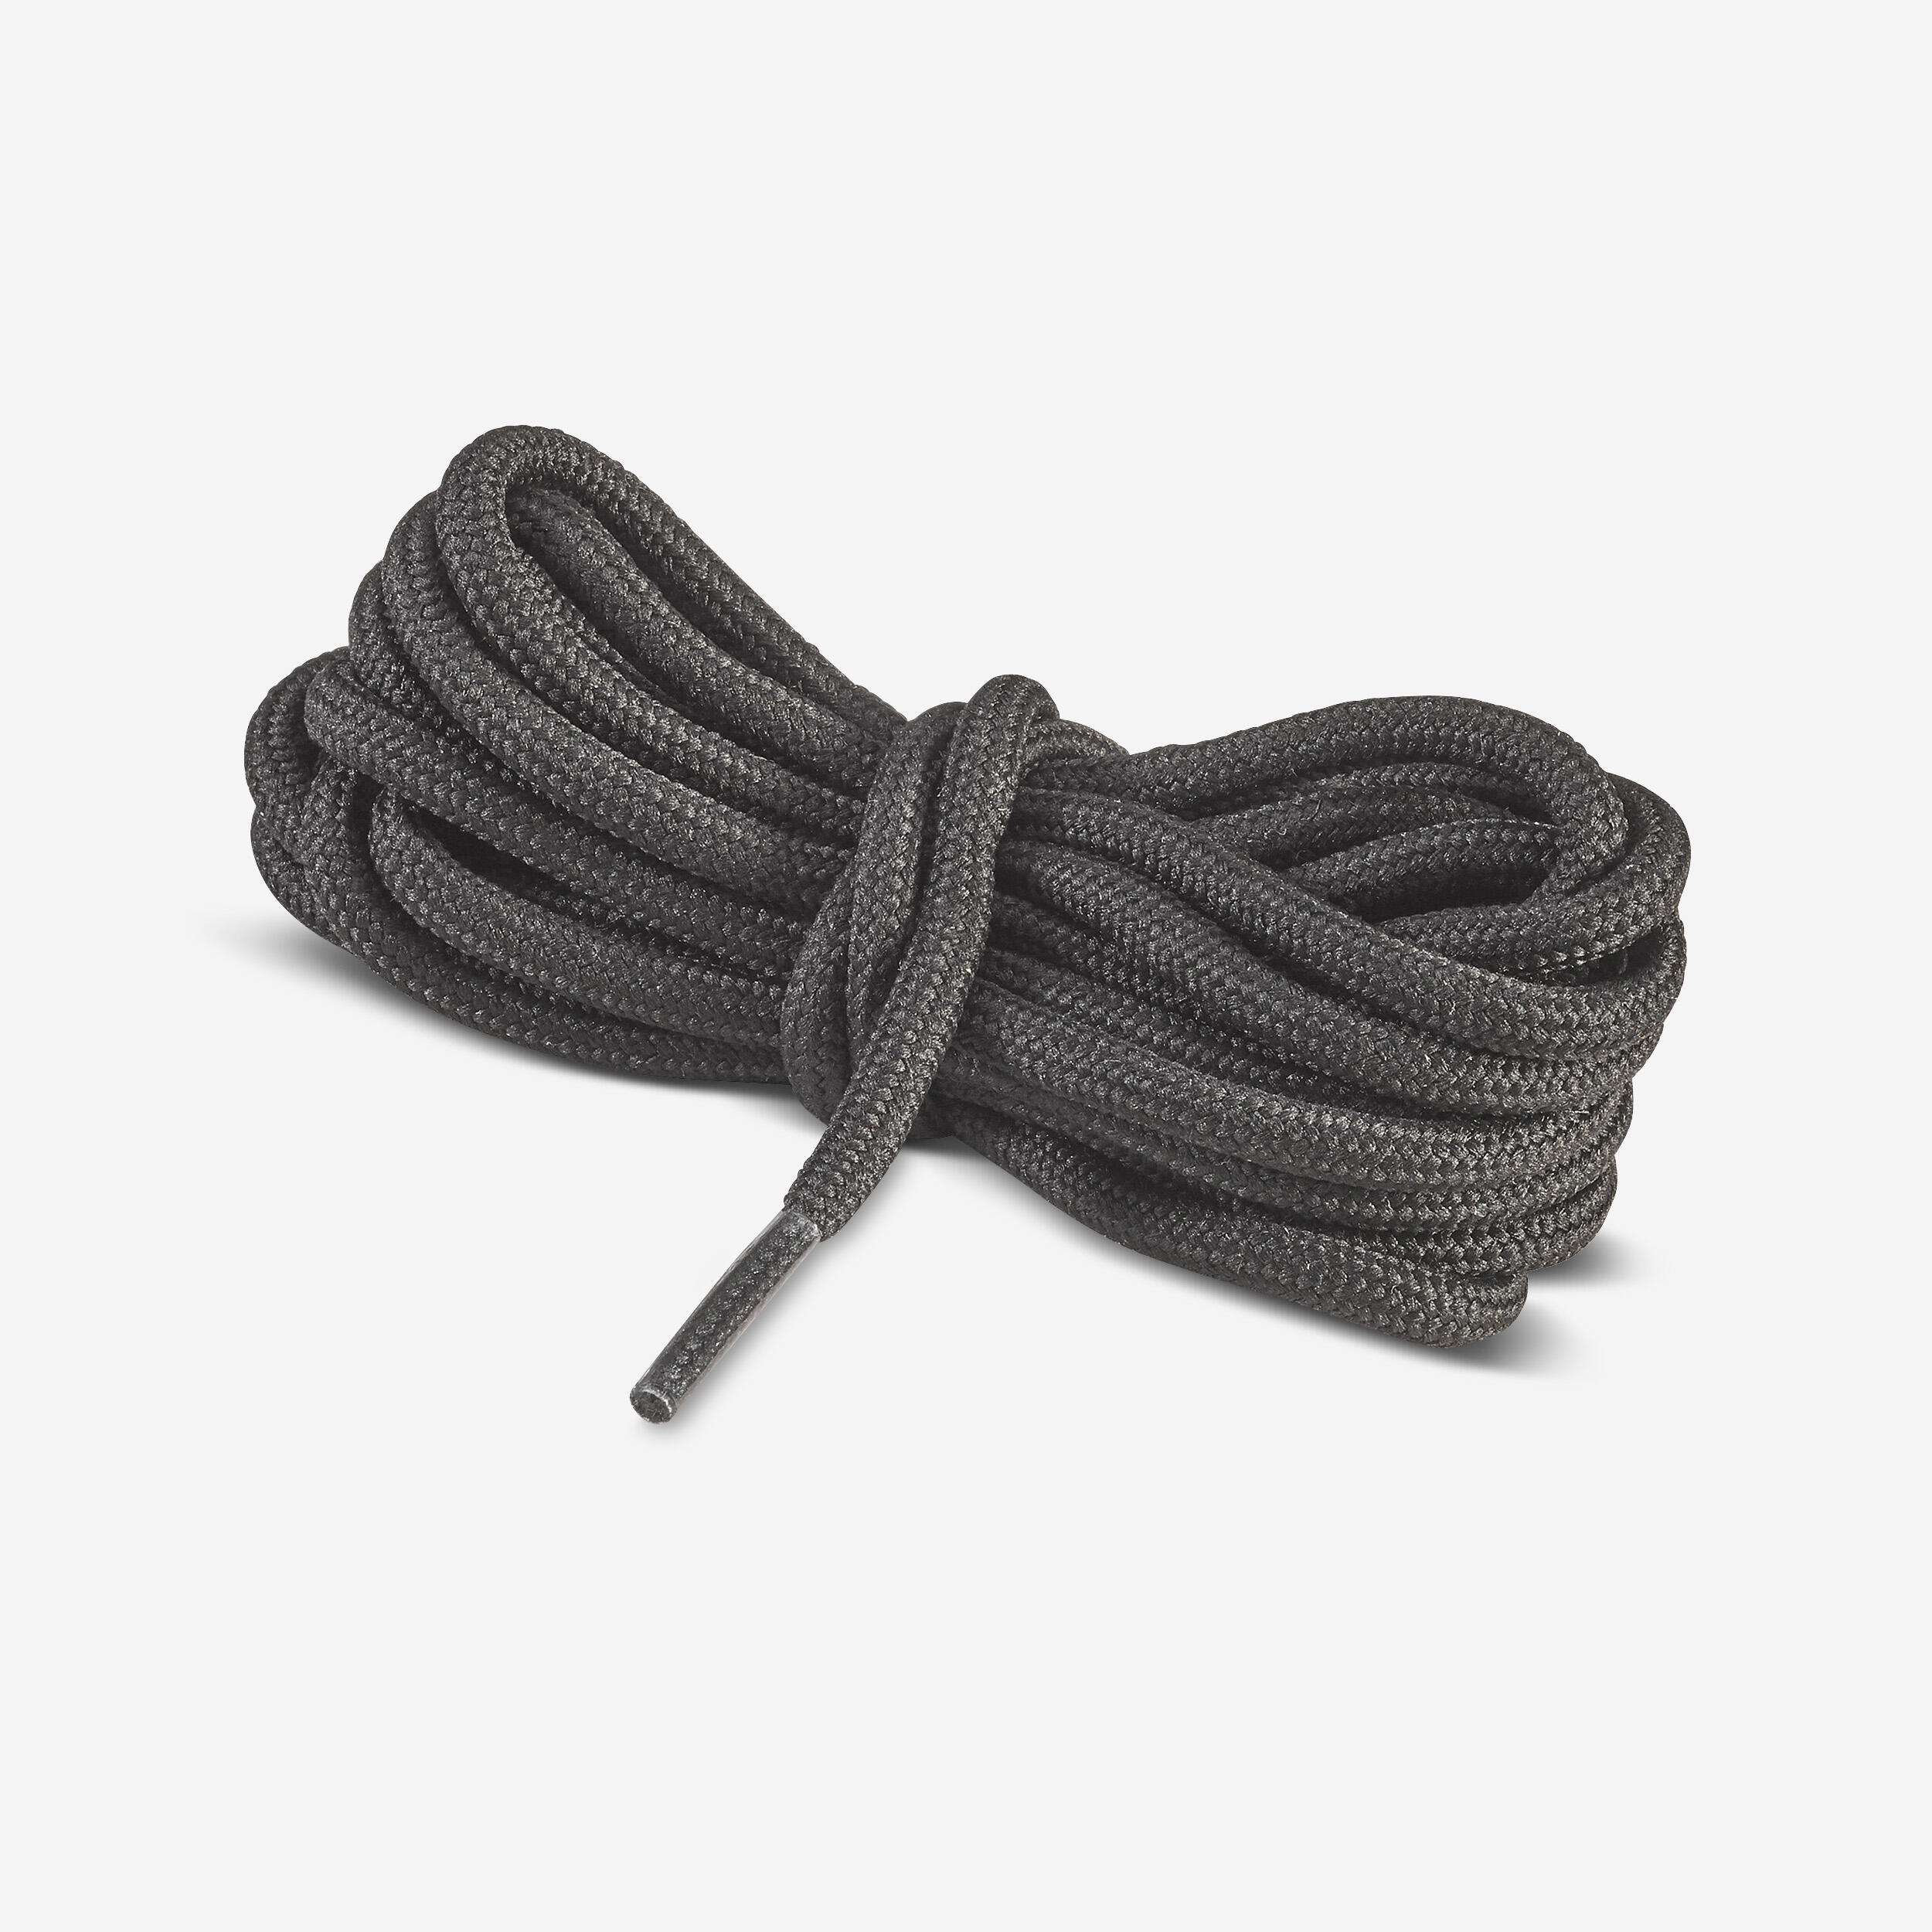 FORCLAZ Round laces for hiking shoes